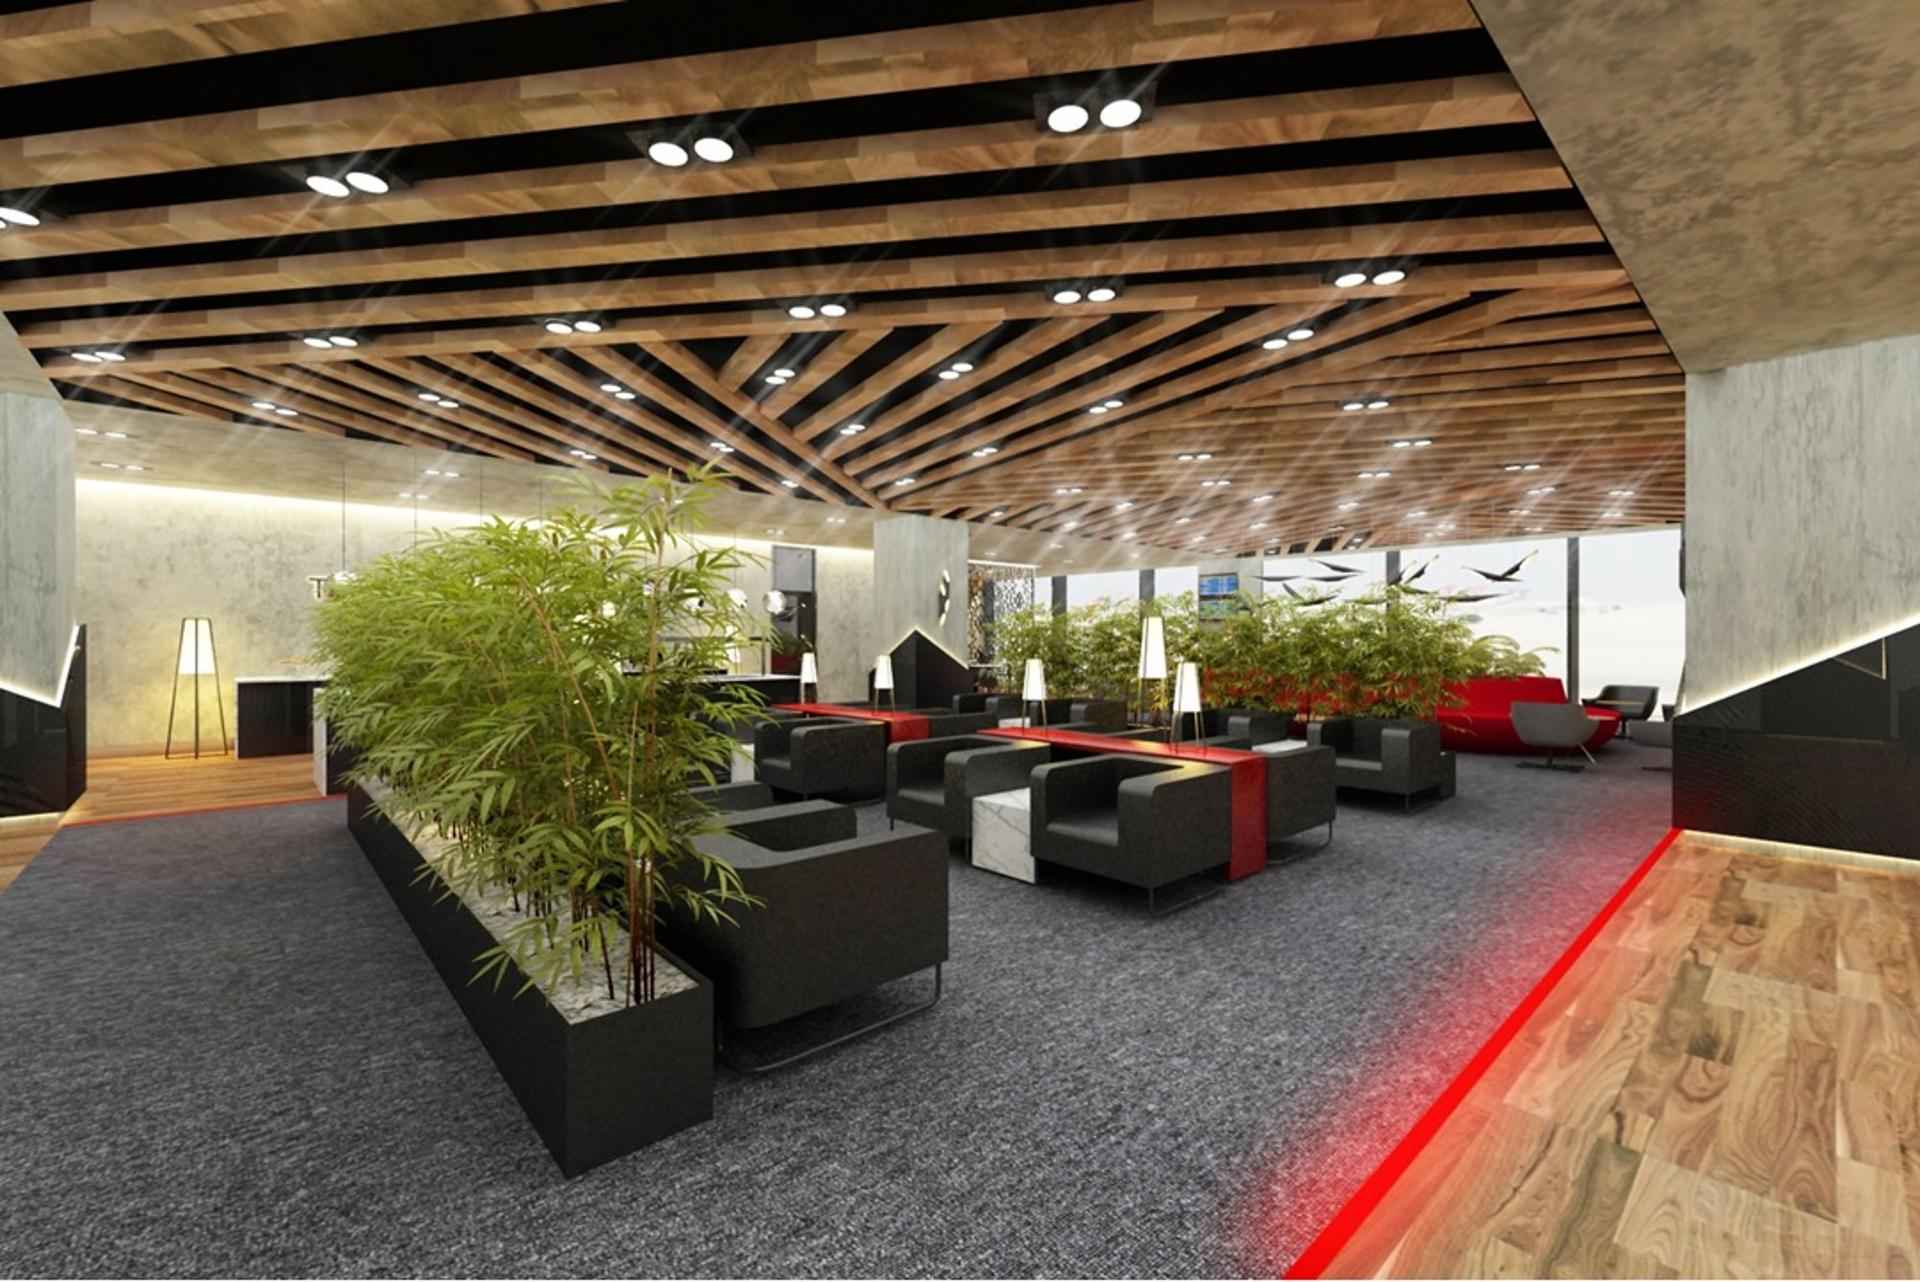 Turkish Airlines CIP Lounge (Business Lounge) image 23 of 27